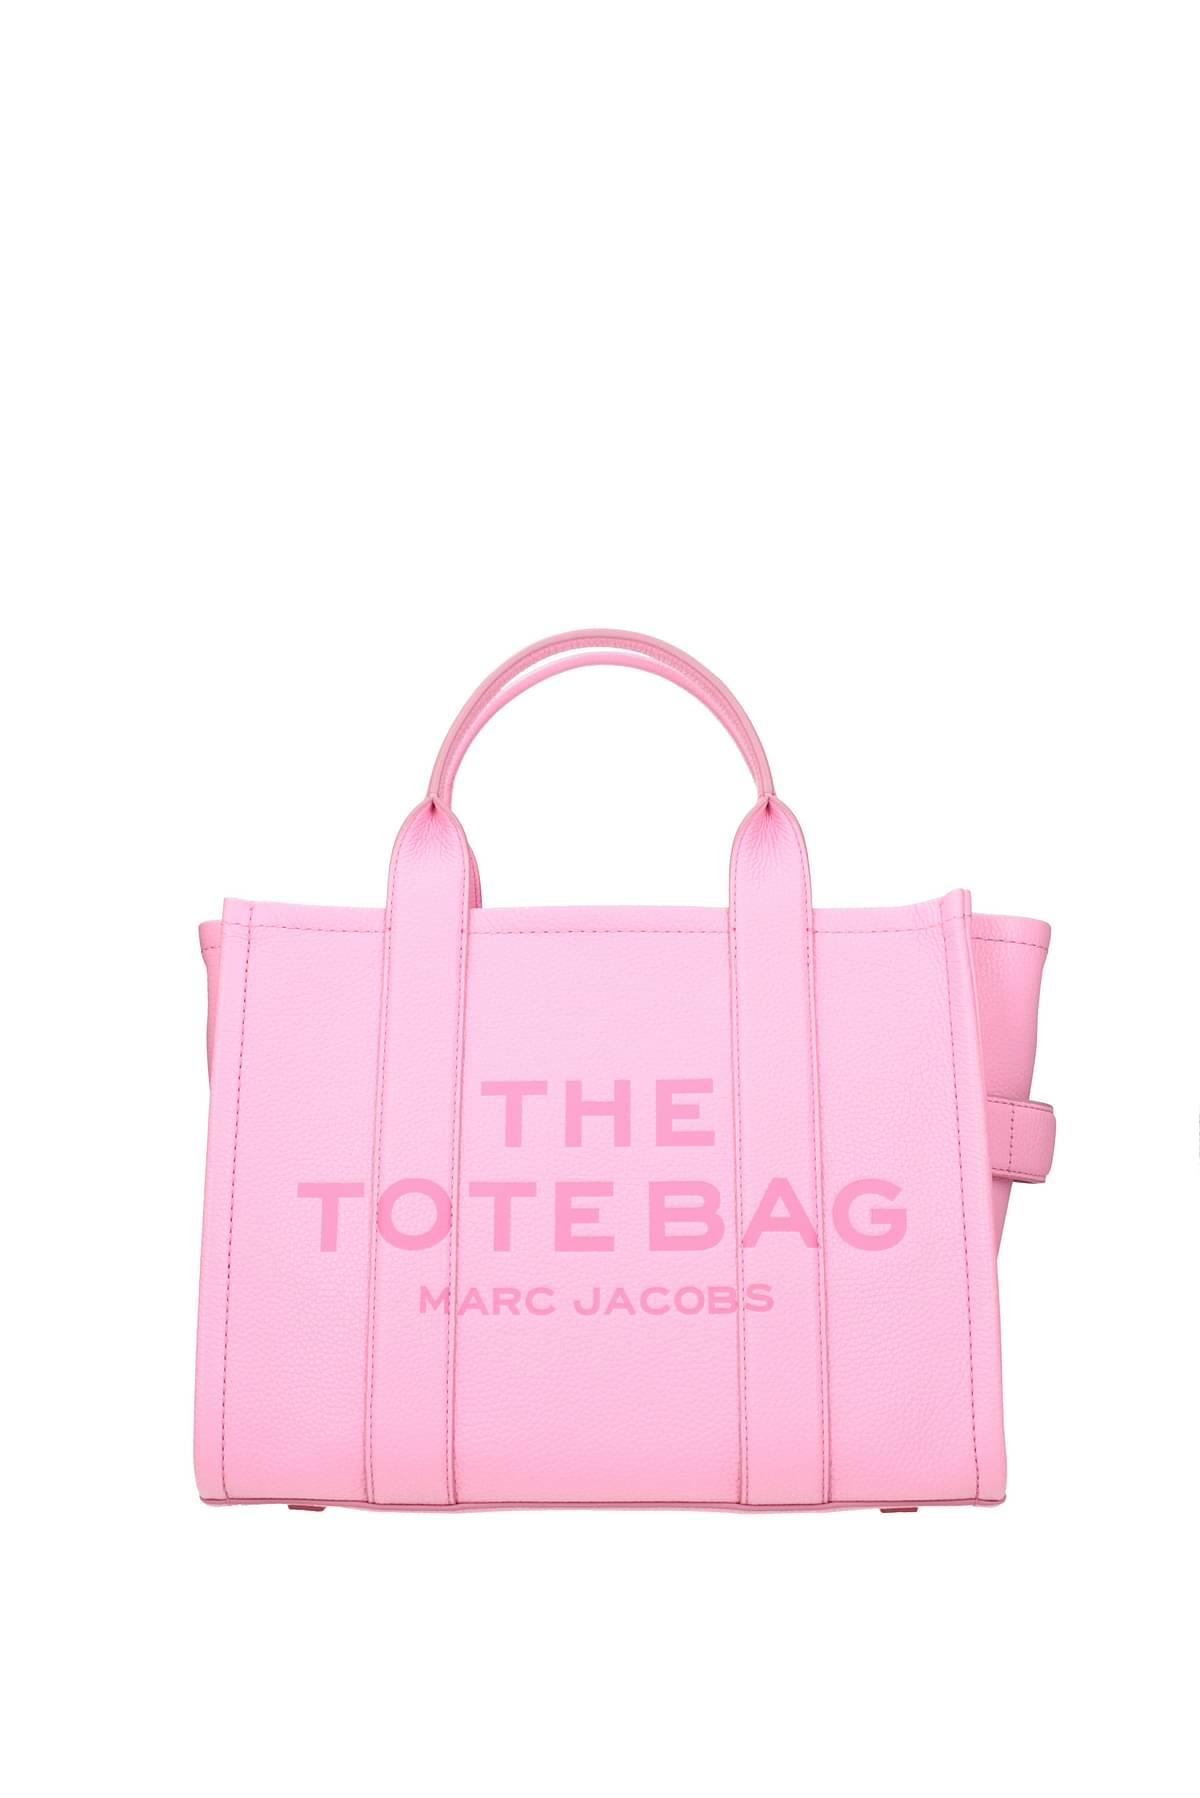 Marc Jacobs Women's Pink Tote Bags